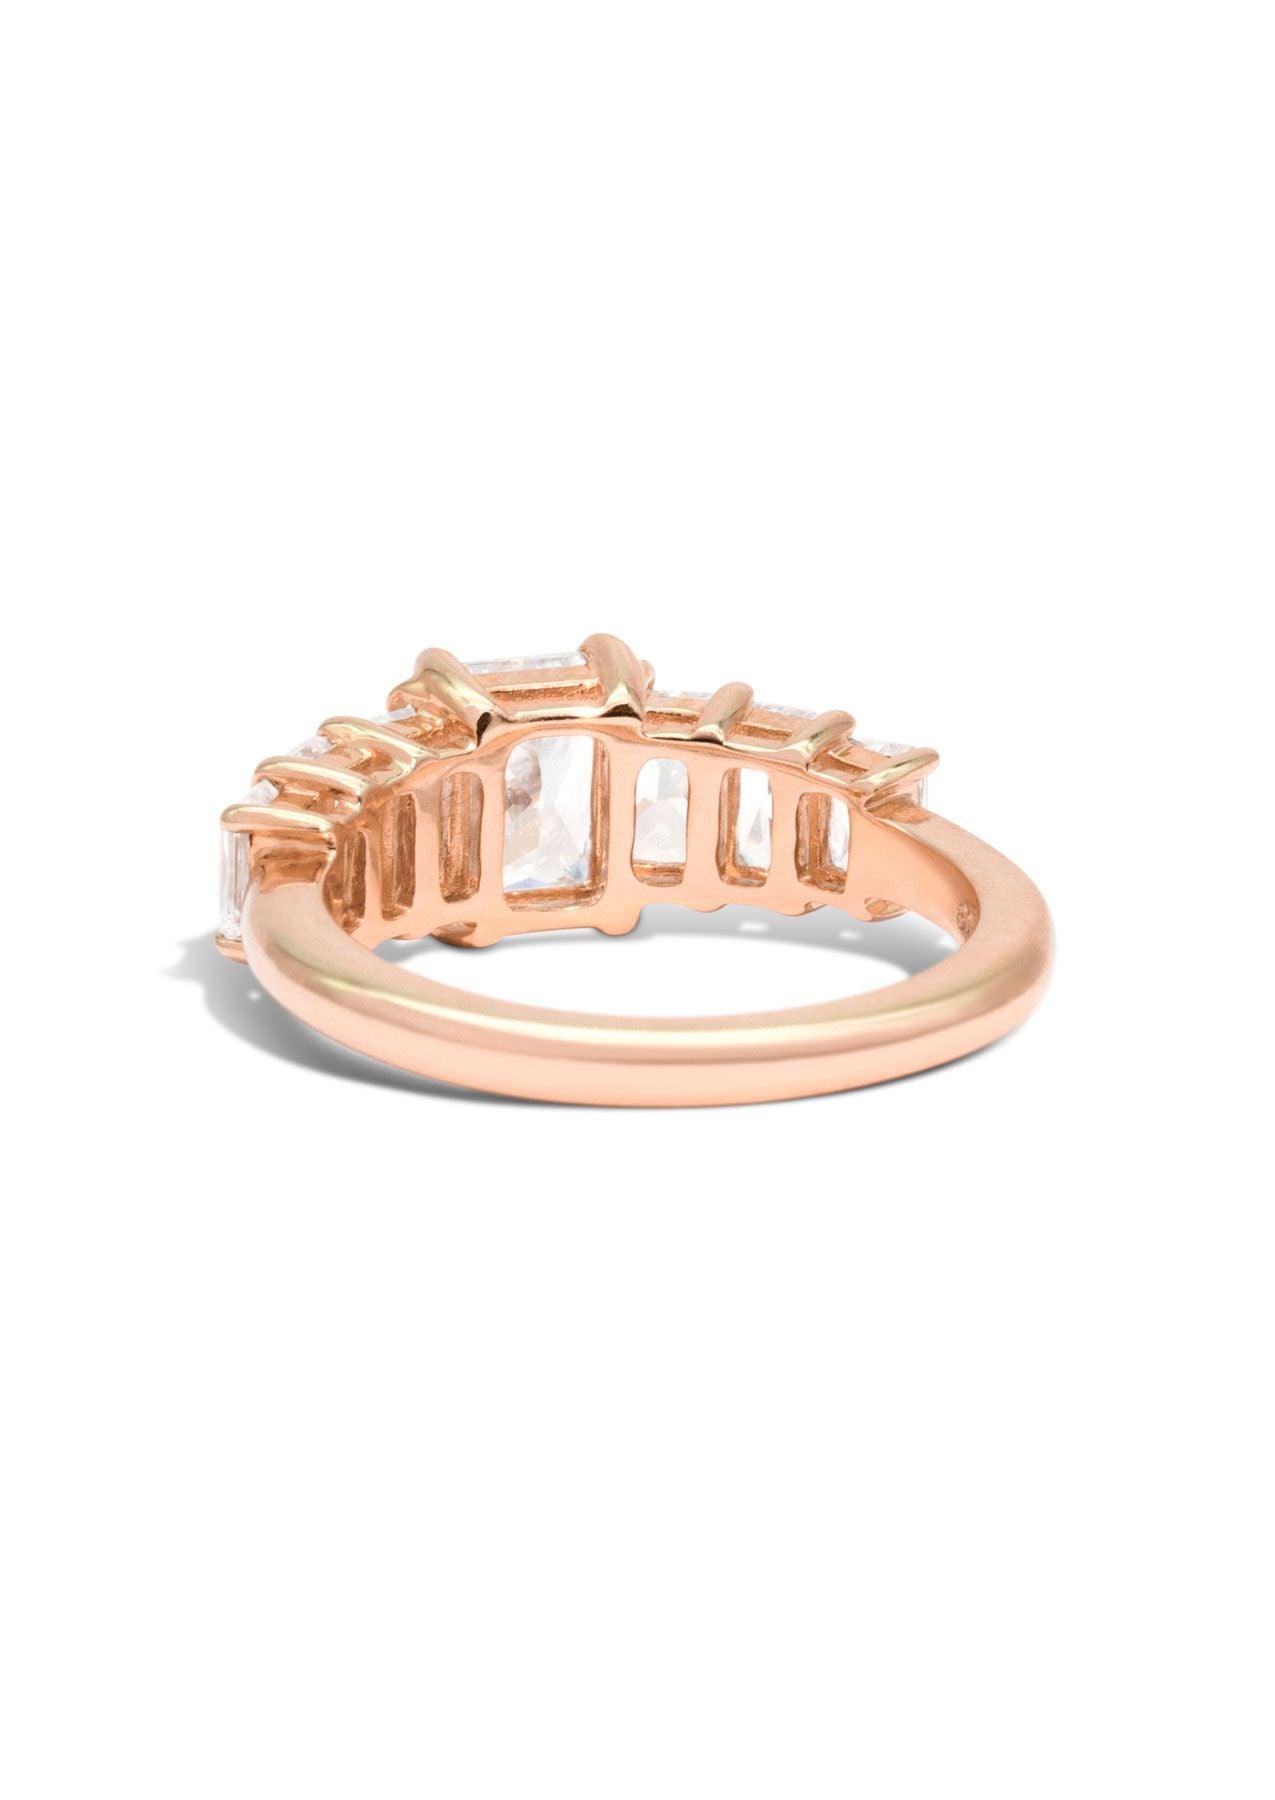 The Radiant Banks Rose Gold Cultured Diamond Ring